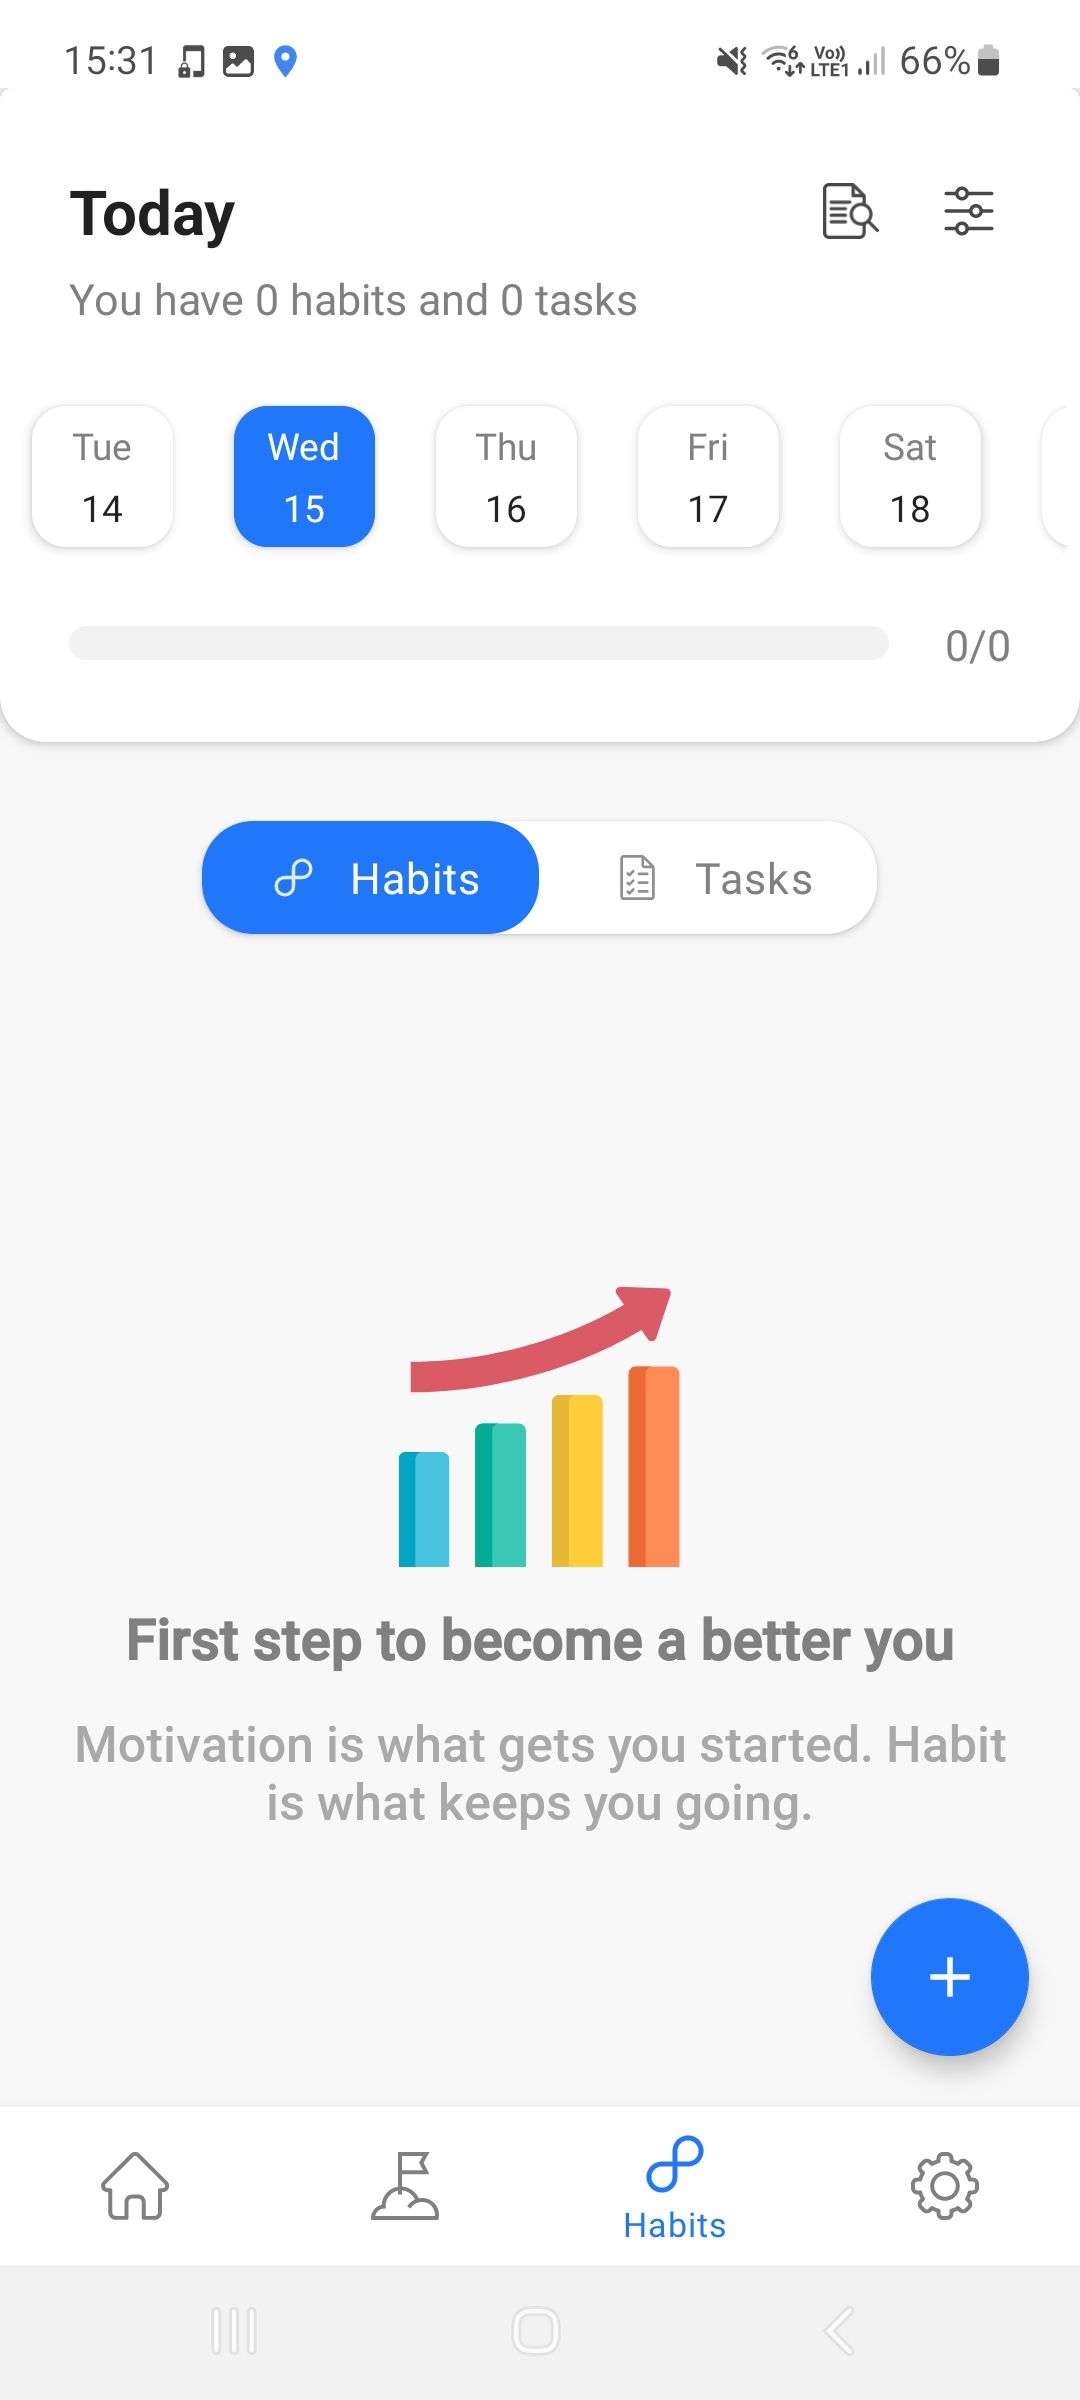 Today's habits page in Reach It app